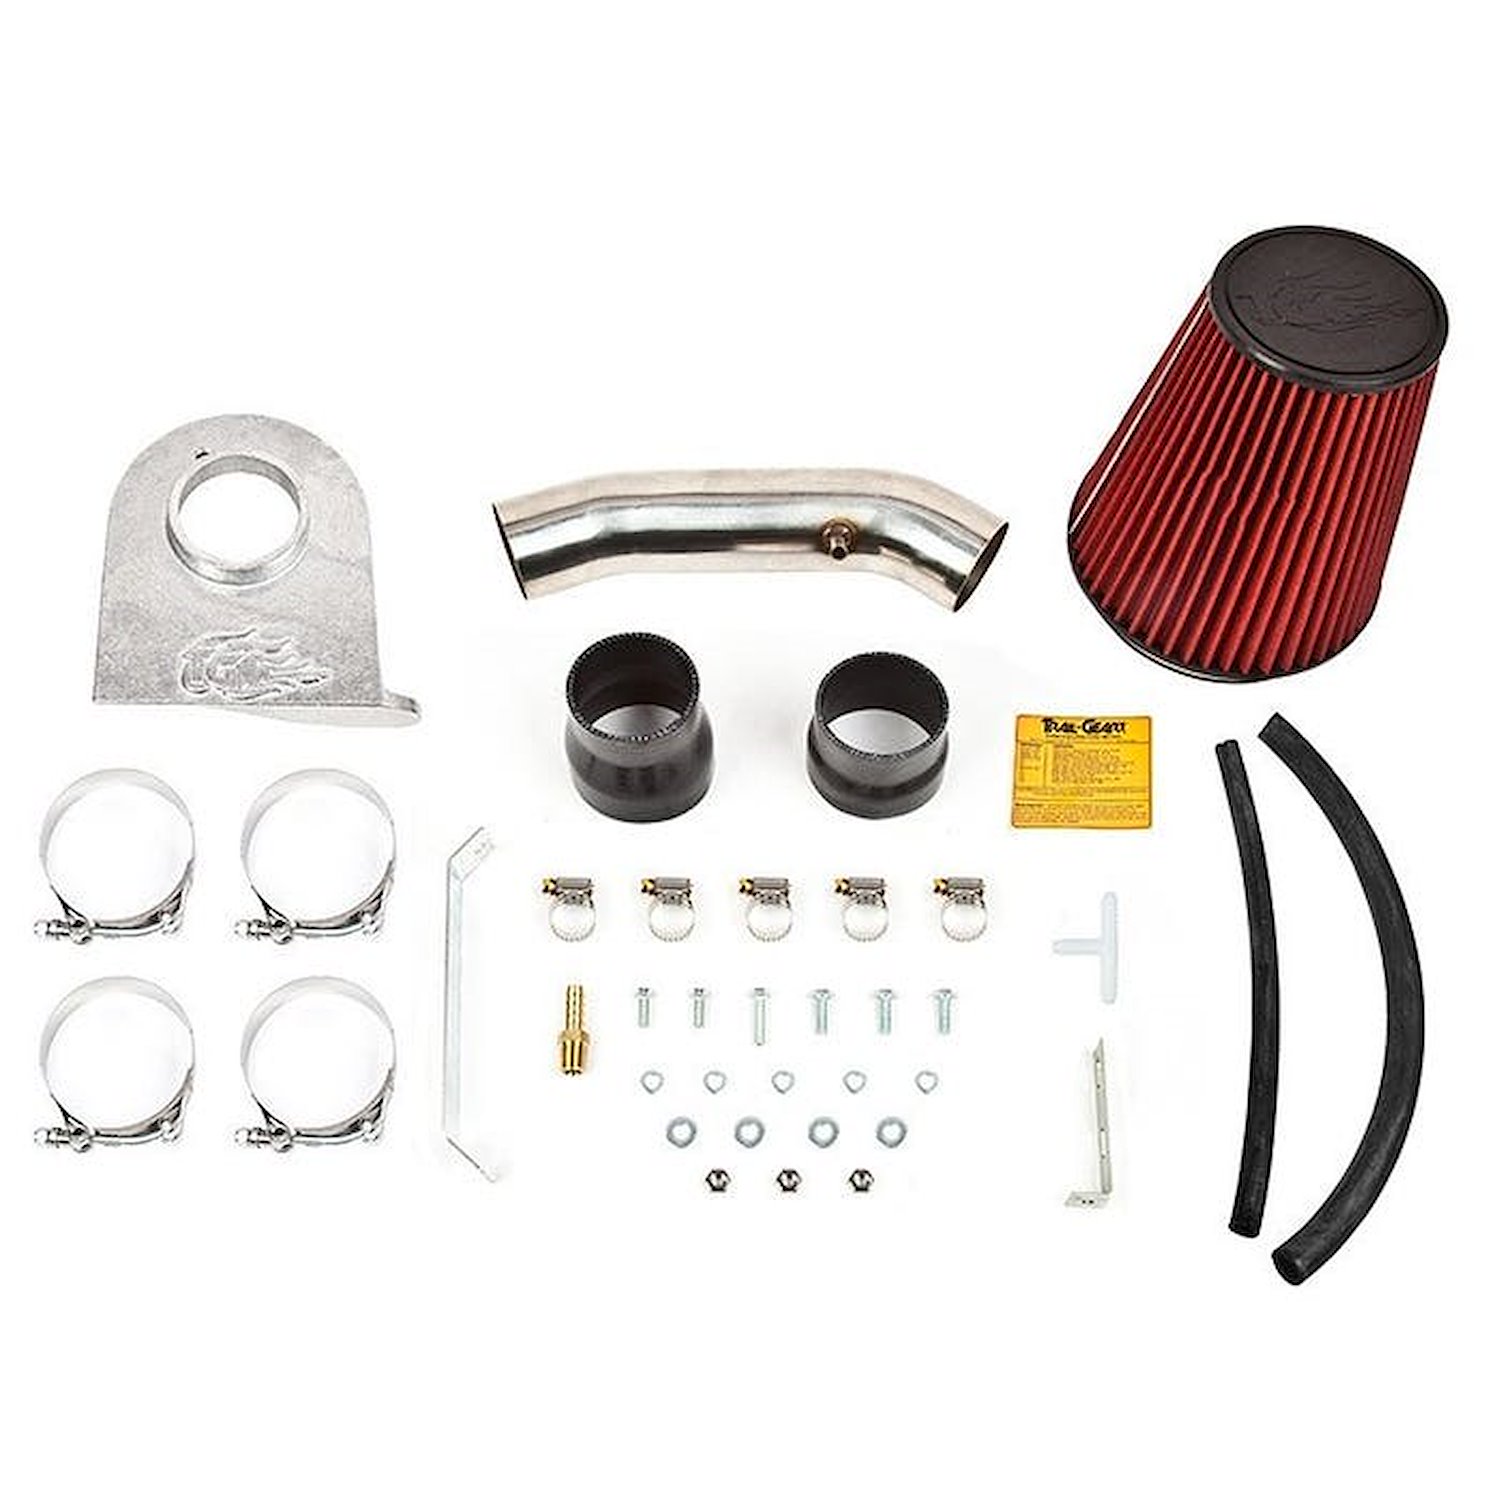 180325-1-KIT Air Intake Kit, Tacoma Rock Ripper Extreme - 50 State Legal (01-04, 2.4L 4 Cylinder, 2WD)